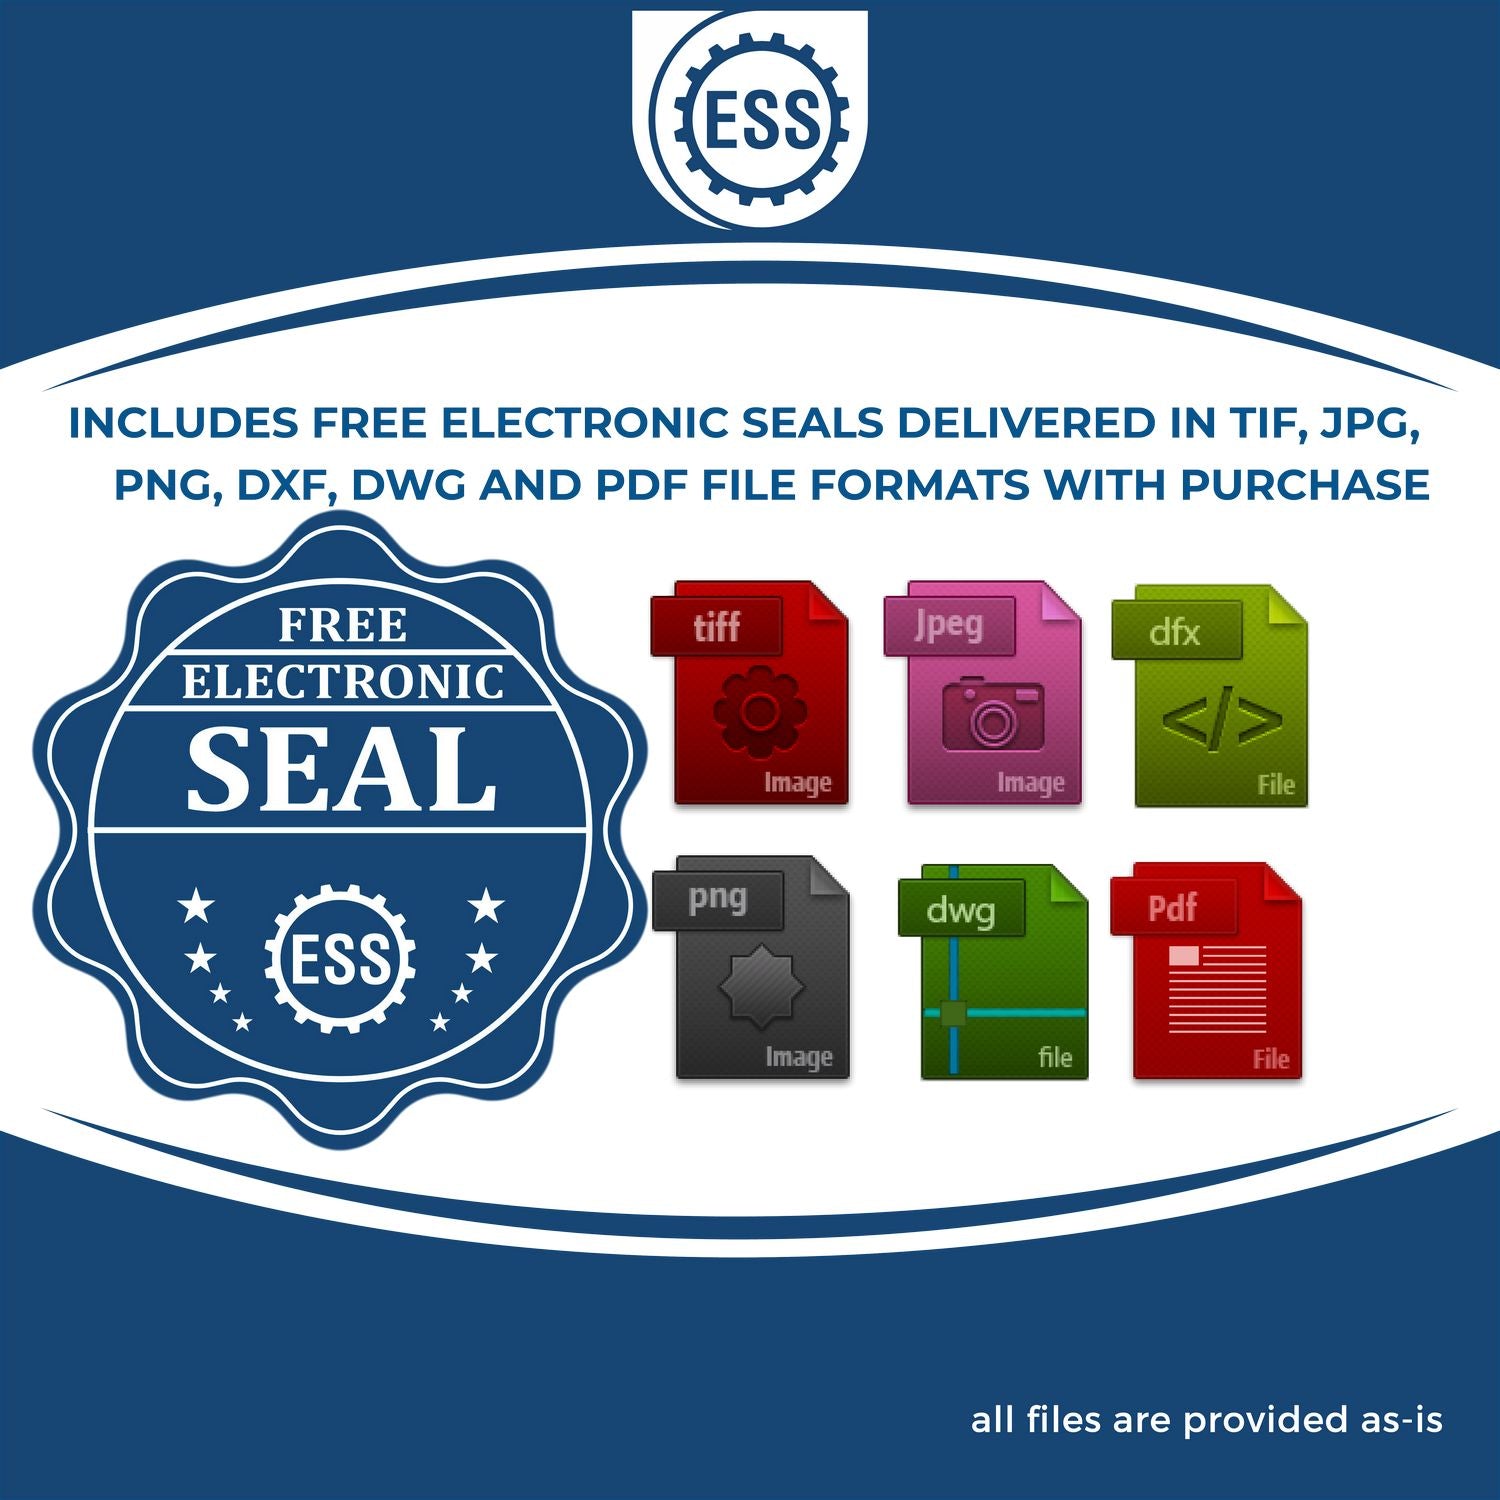 An infographic for the free electronic seal for the Long Reach Tennessee Land Surveyor Seal illustrating the different file type icons such as DXF, DWG, TIF, JPG and PNG.